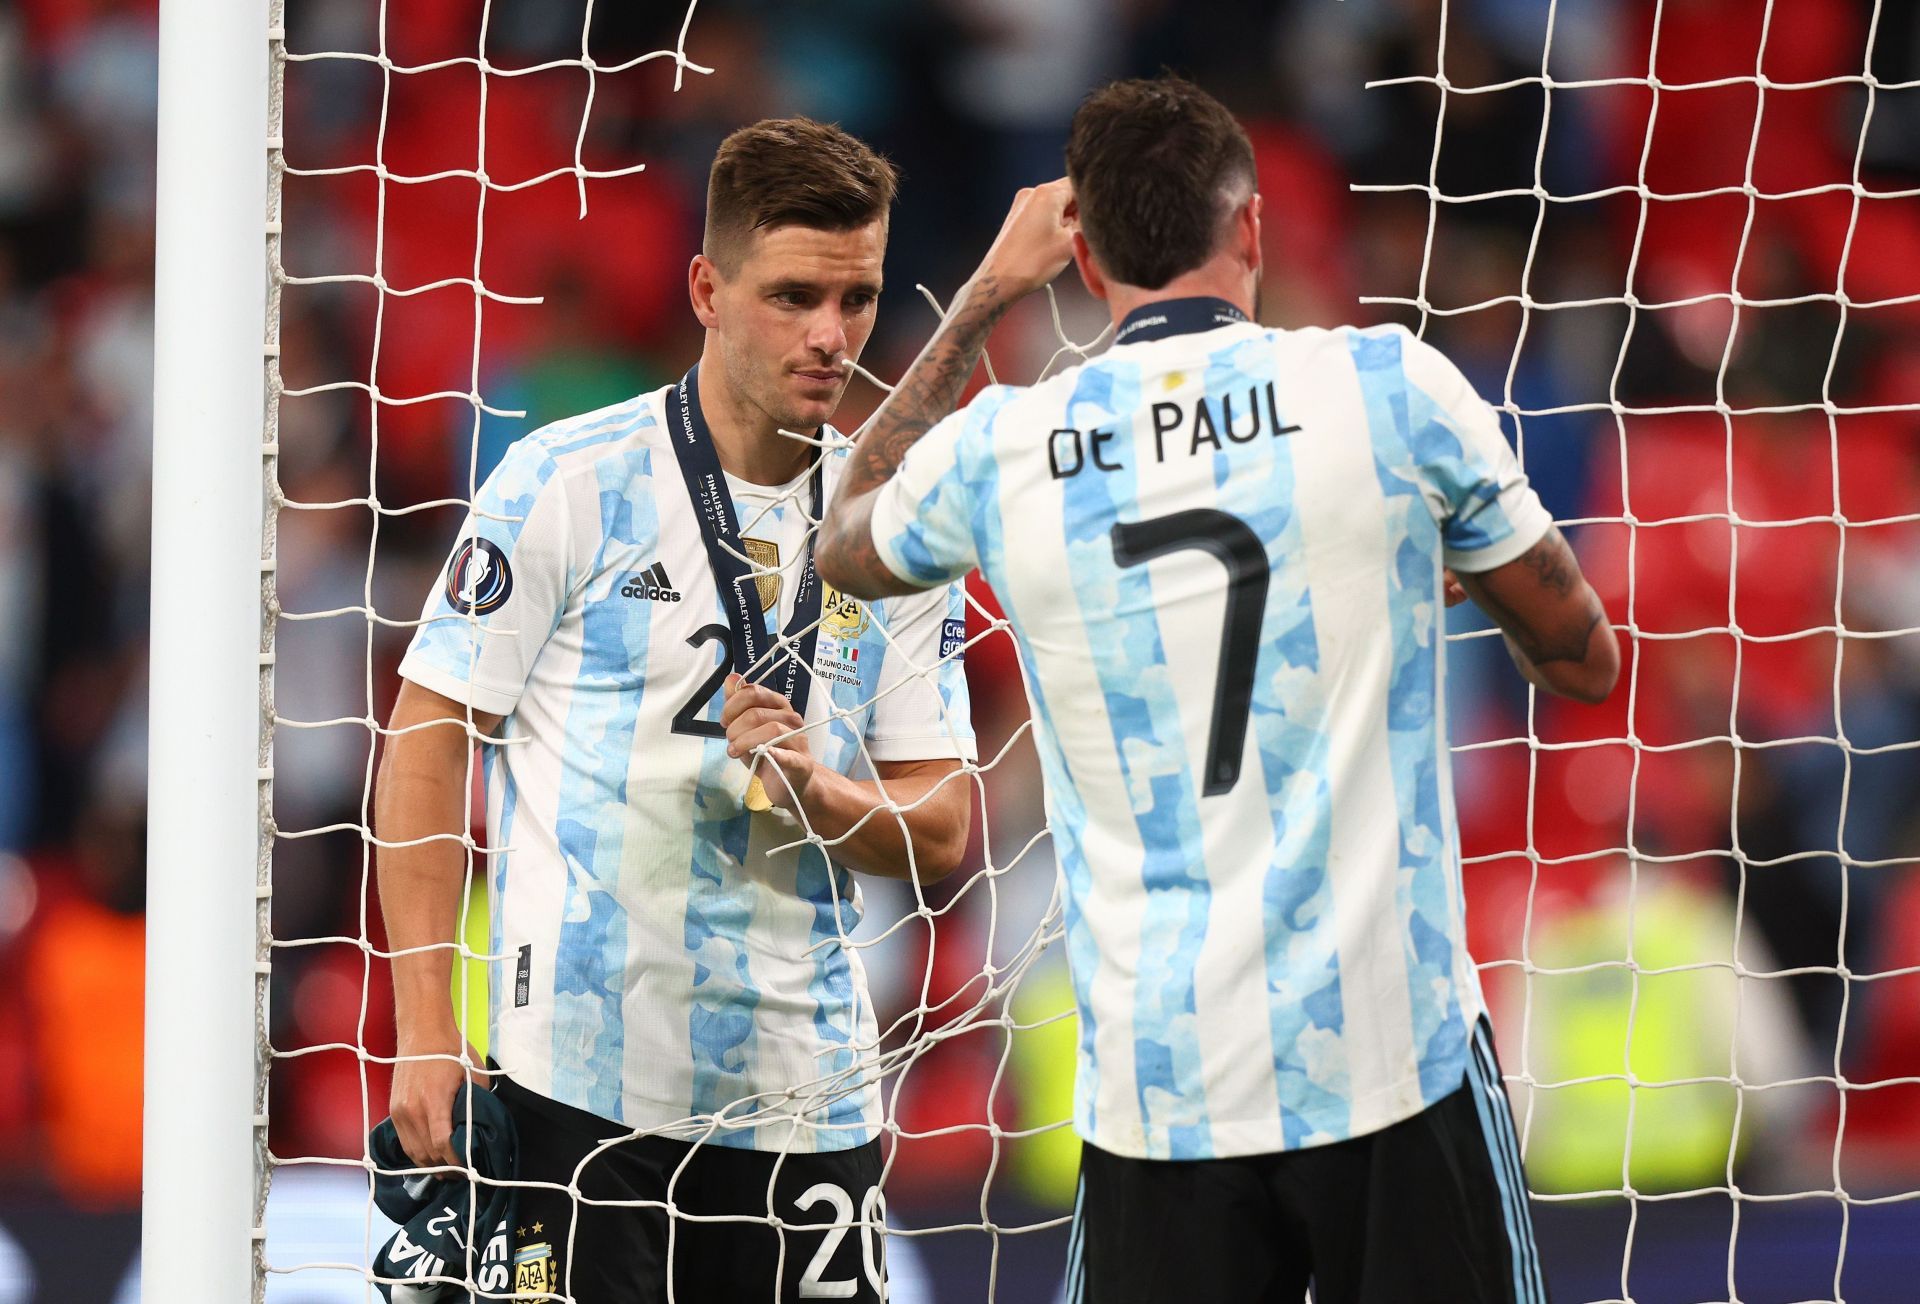 Argentina have looked simply unstoppable in recent games and will be a force to reckon with at the 2022 FIFA World Cup.